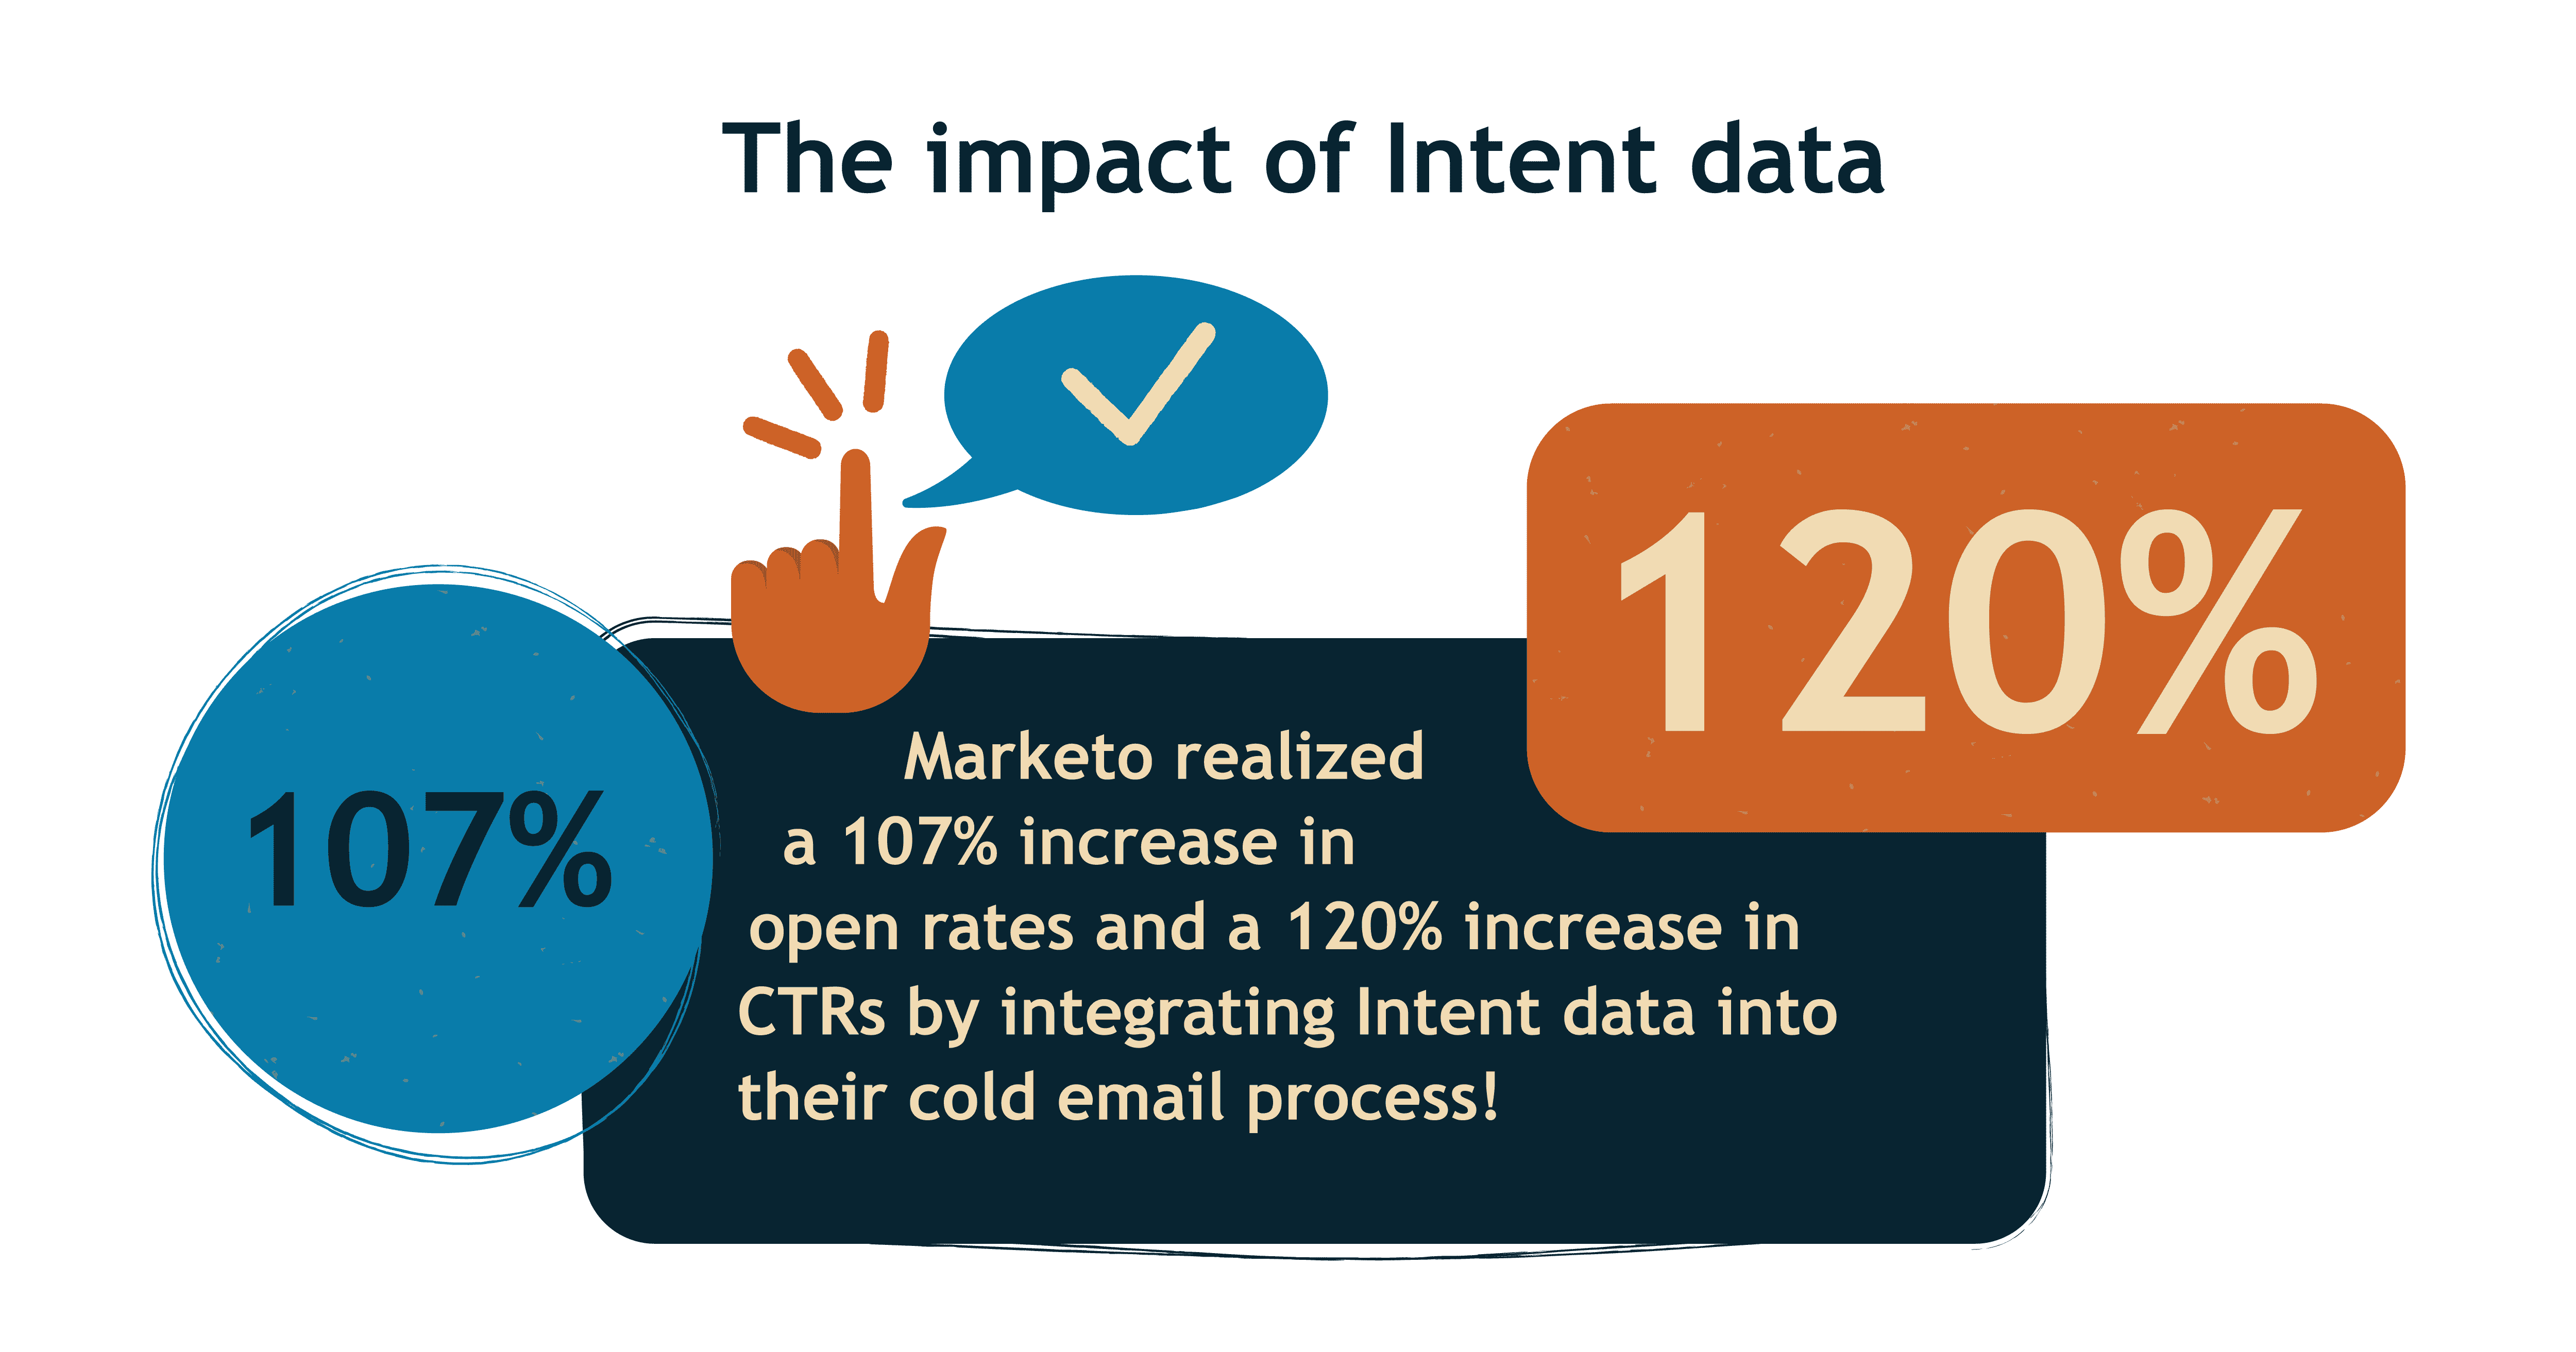 The impact of Intent data